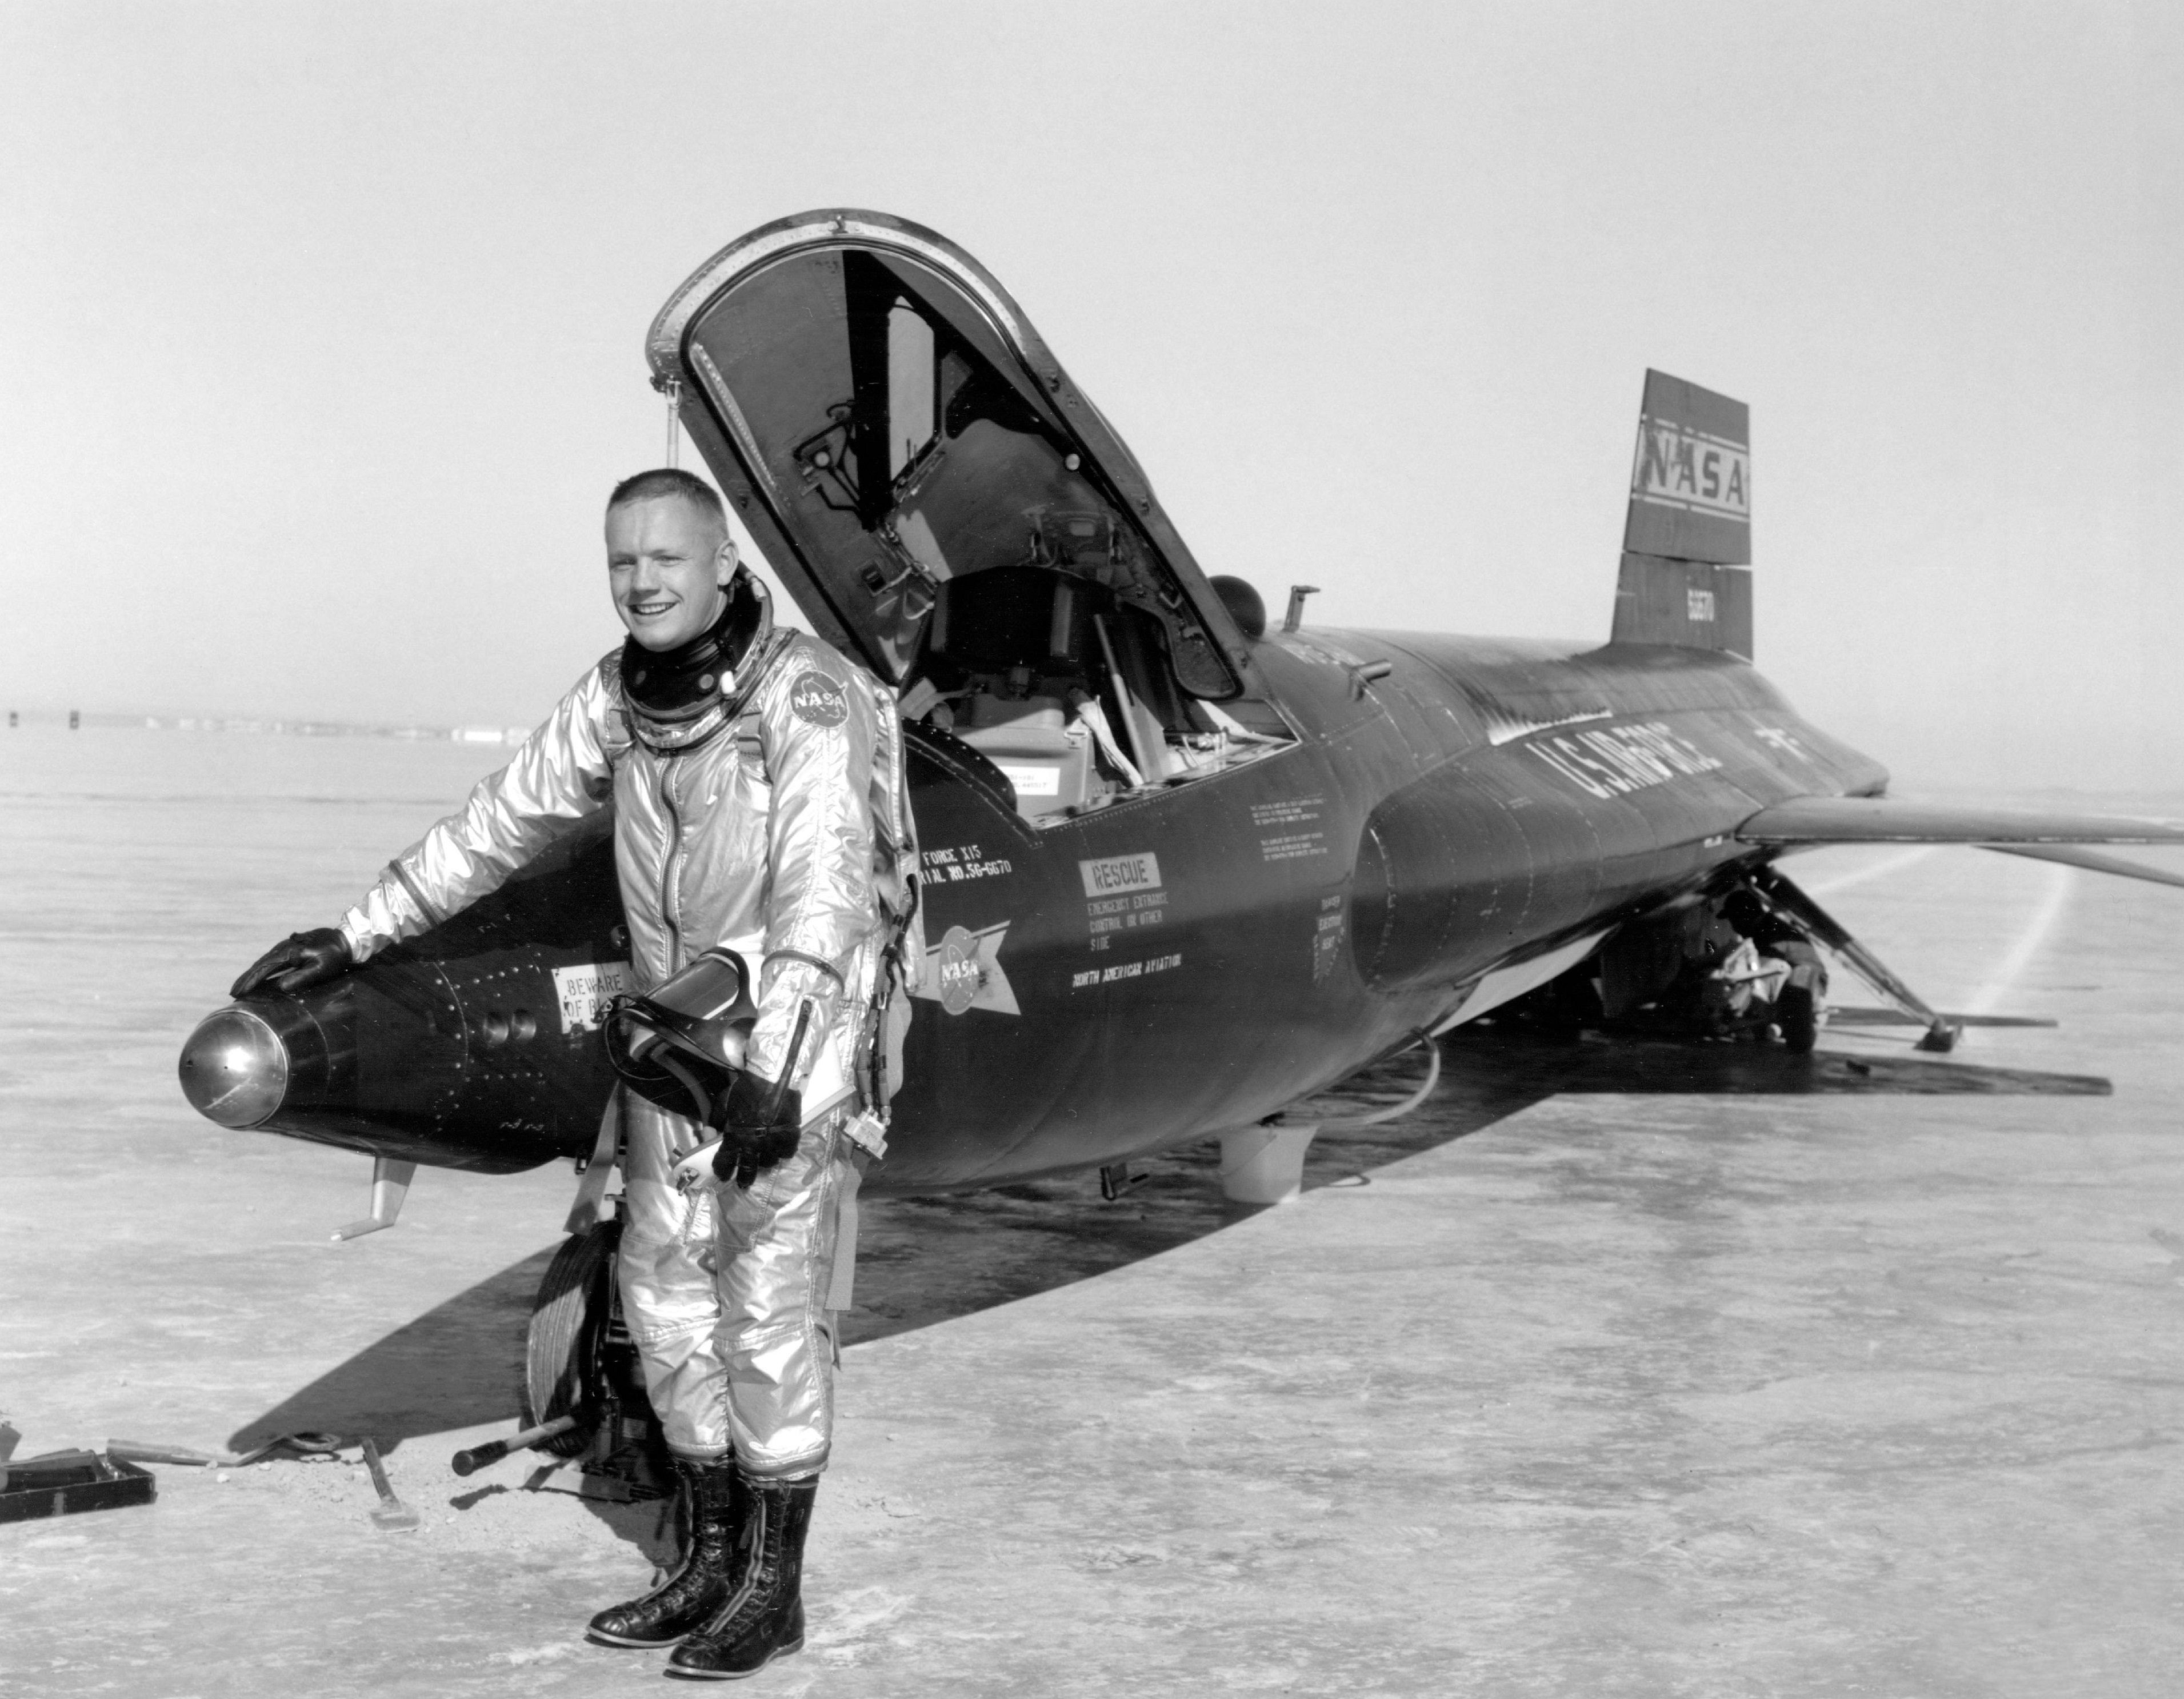 Neil Armstrong with the first North American Aviation X-15A, 56-6670, on Rogers Dry Lake after a flight, 1960. (NASA)